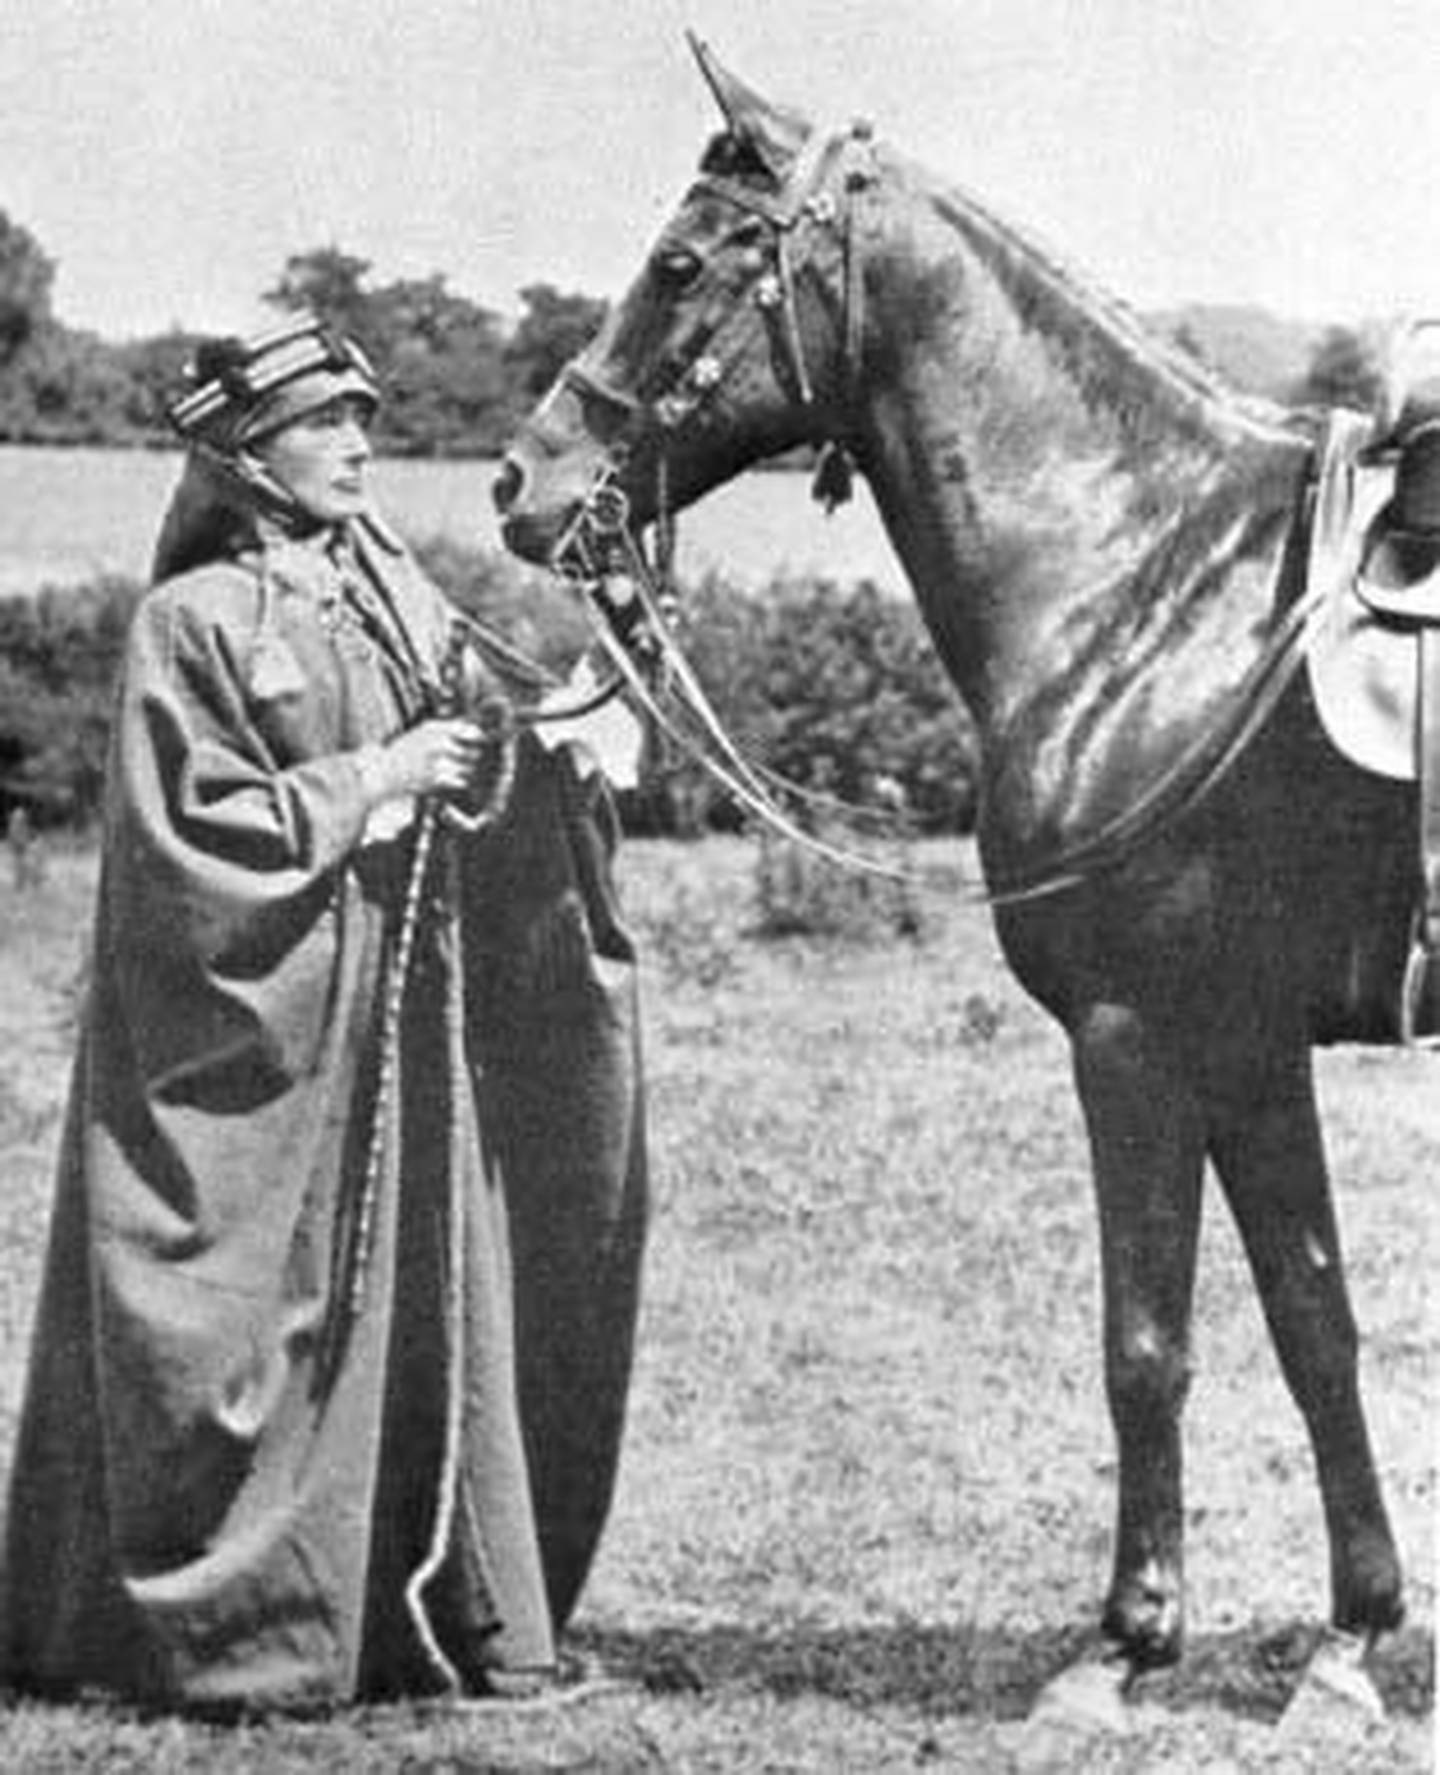 Lady Anne Blunt, who travelled in the region down as far as Hail in the 1880s and 90s buying Arabian horses. Photo: Royal Geographic Society